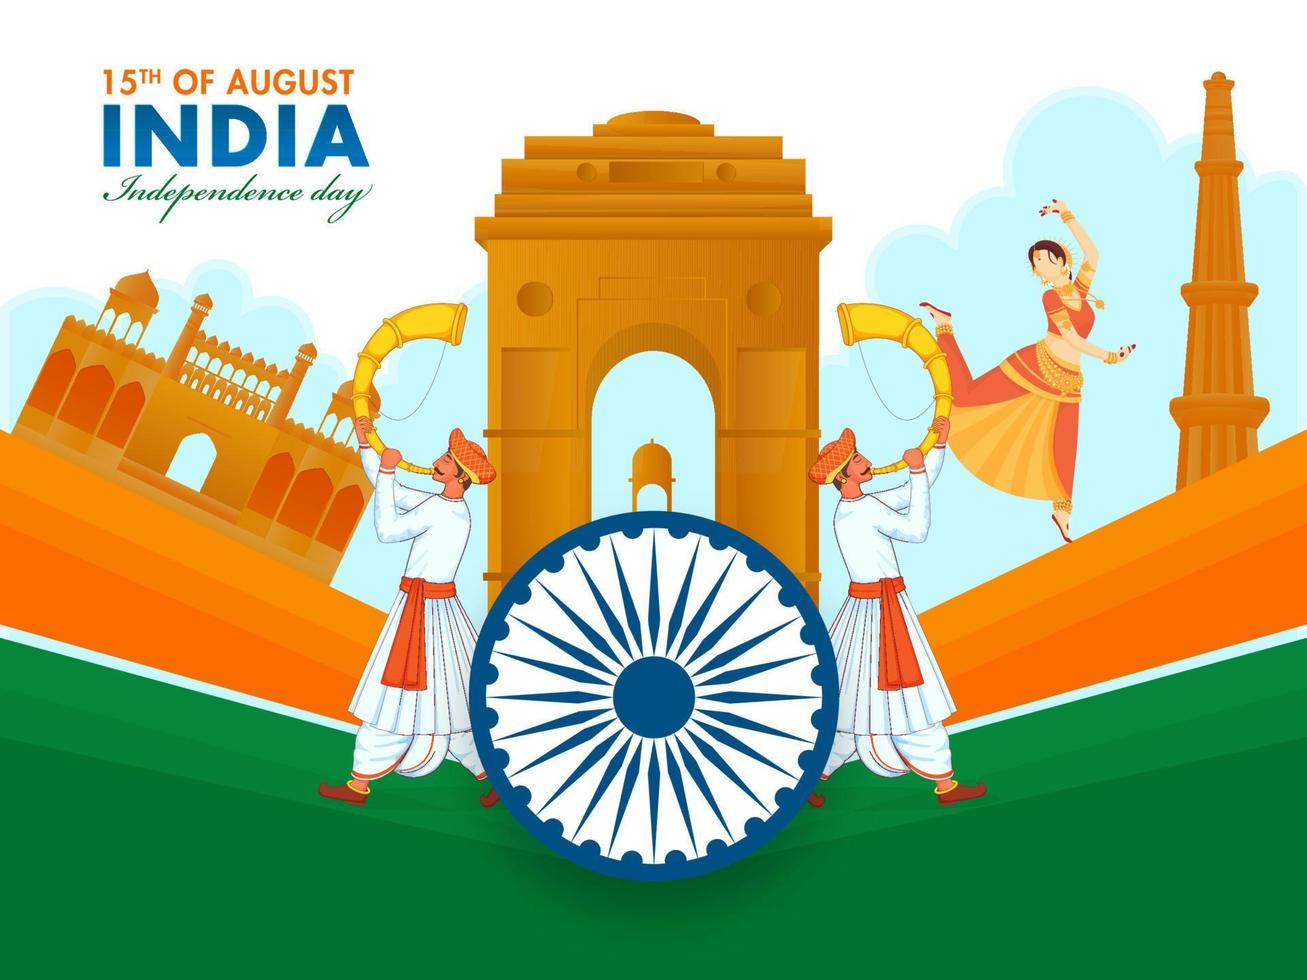 India Independence Day Celebration Background with Ashoka Wheel, Famous Monuments, Classical Dancer Woman and Men Blowing Tutari Horn. vector